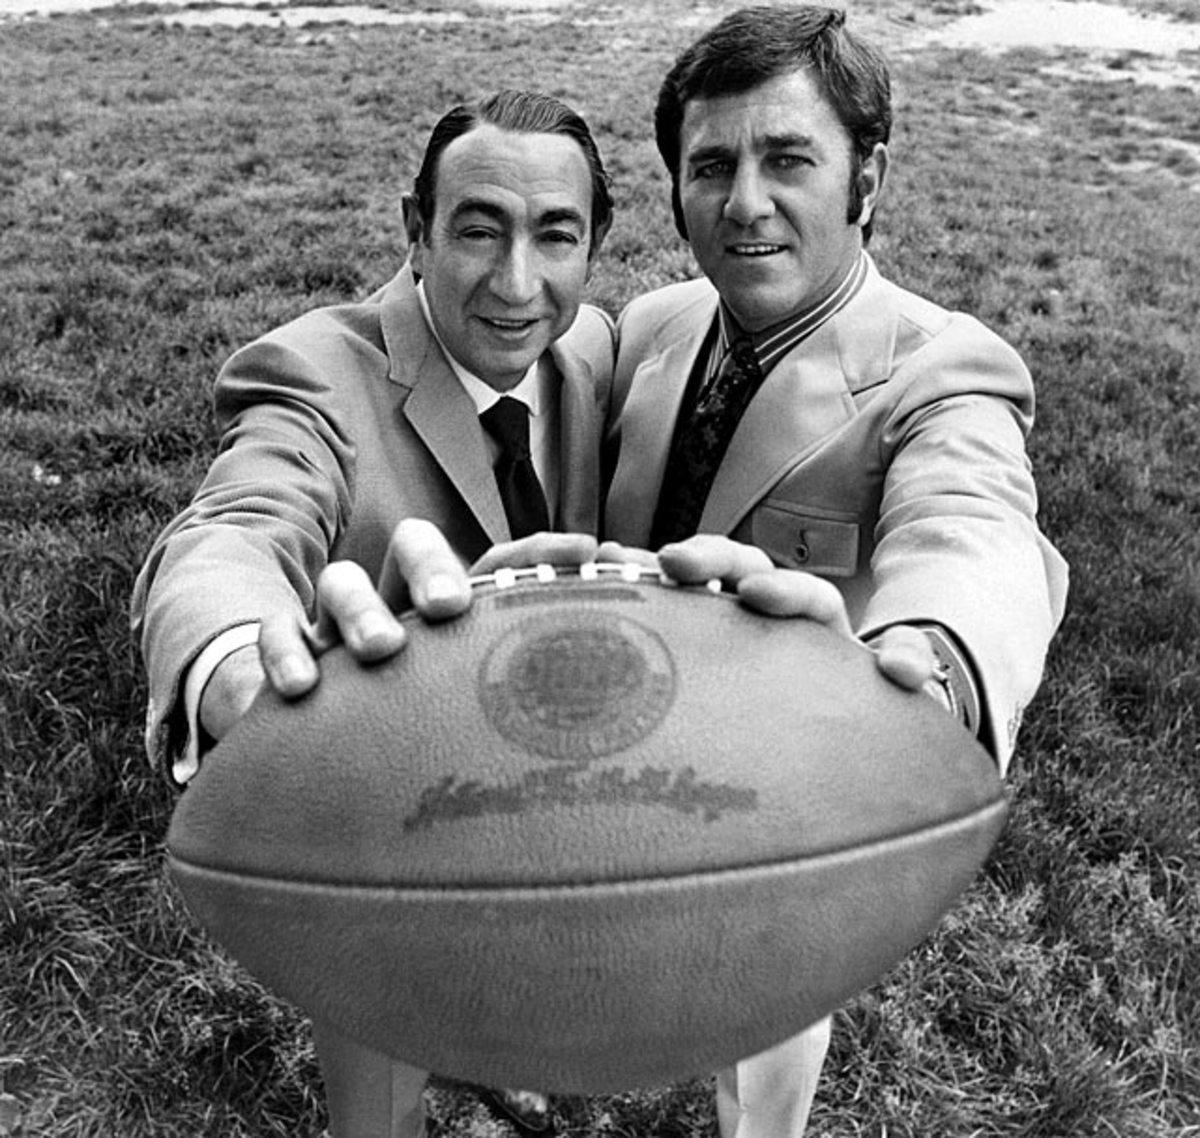 Howard Cosell and Don Meredith